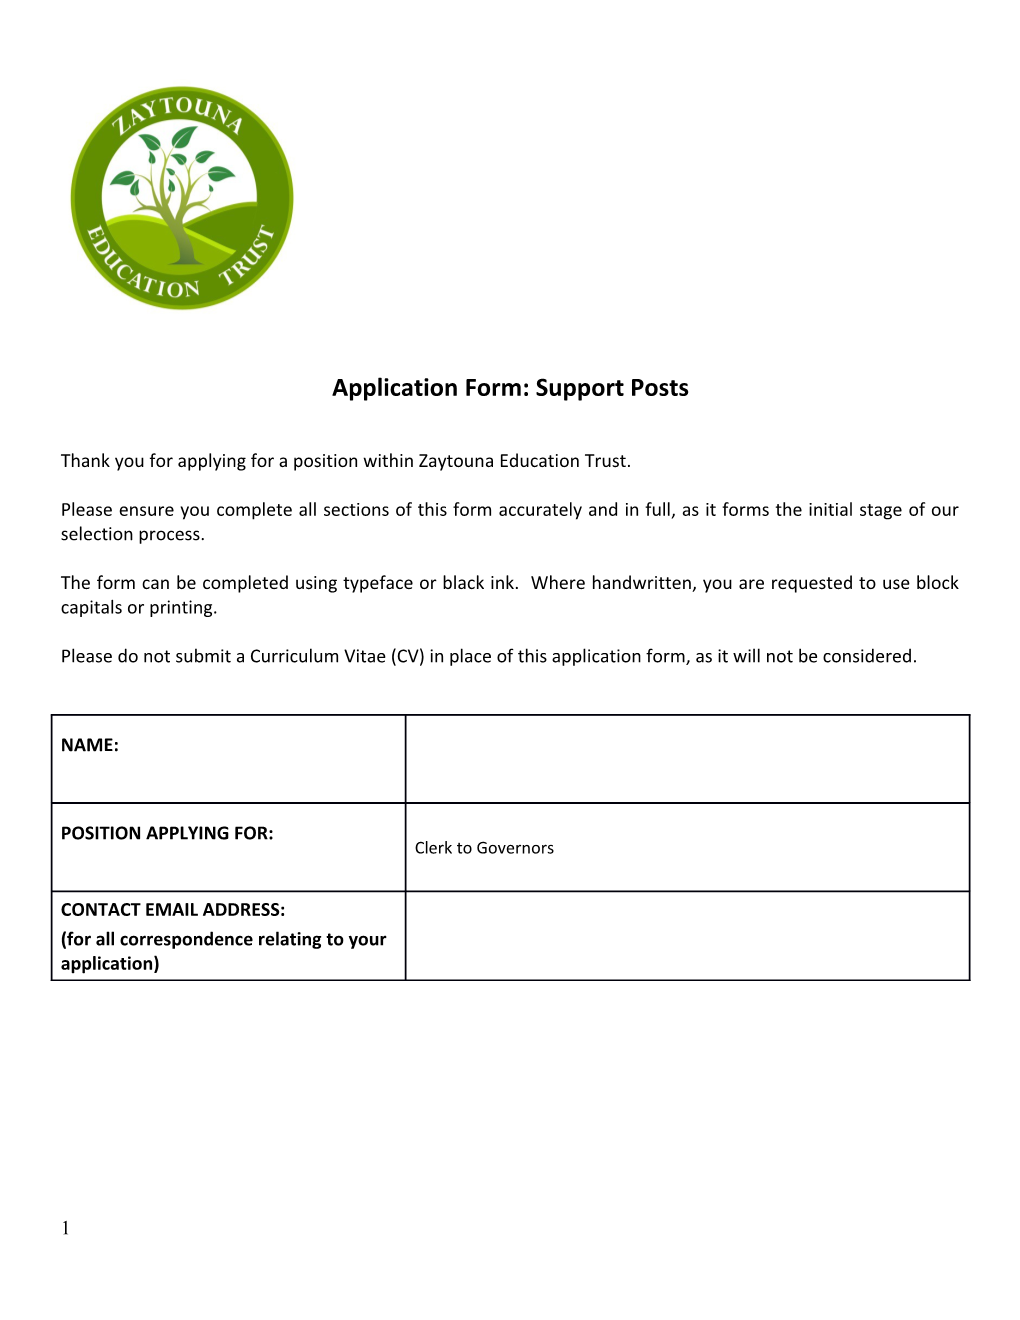 Application Form: Support Posts